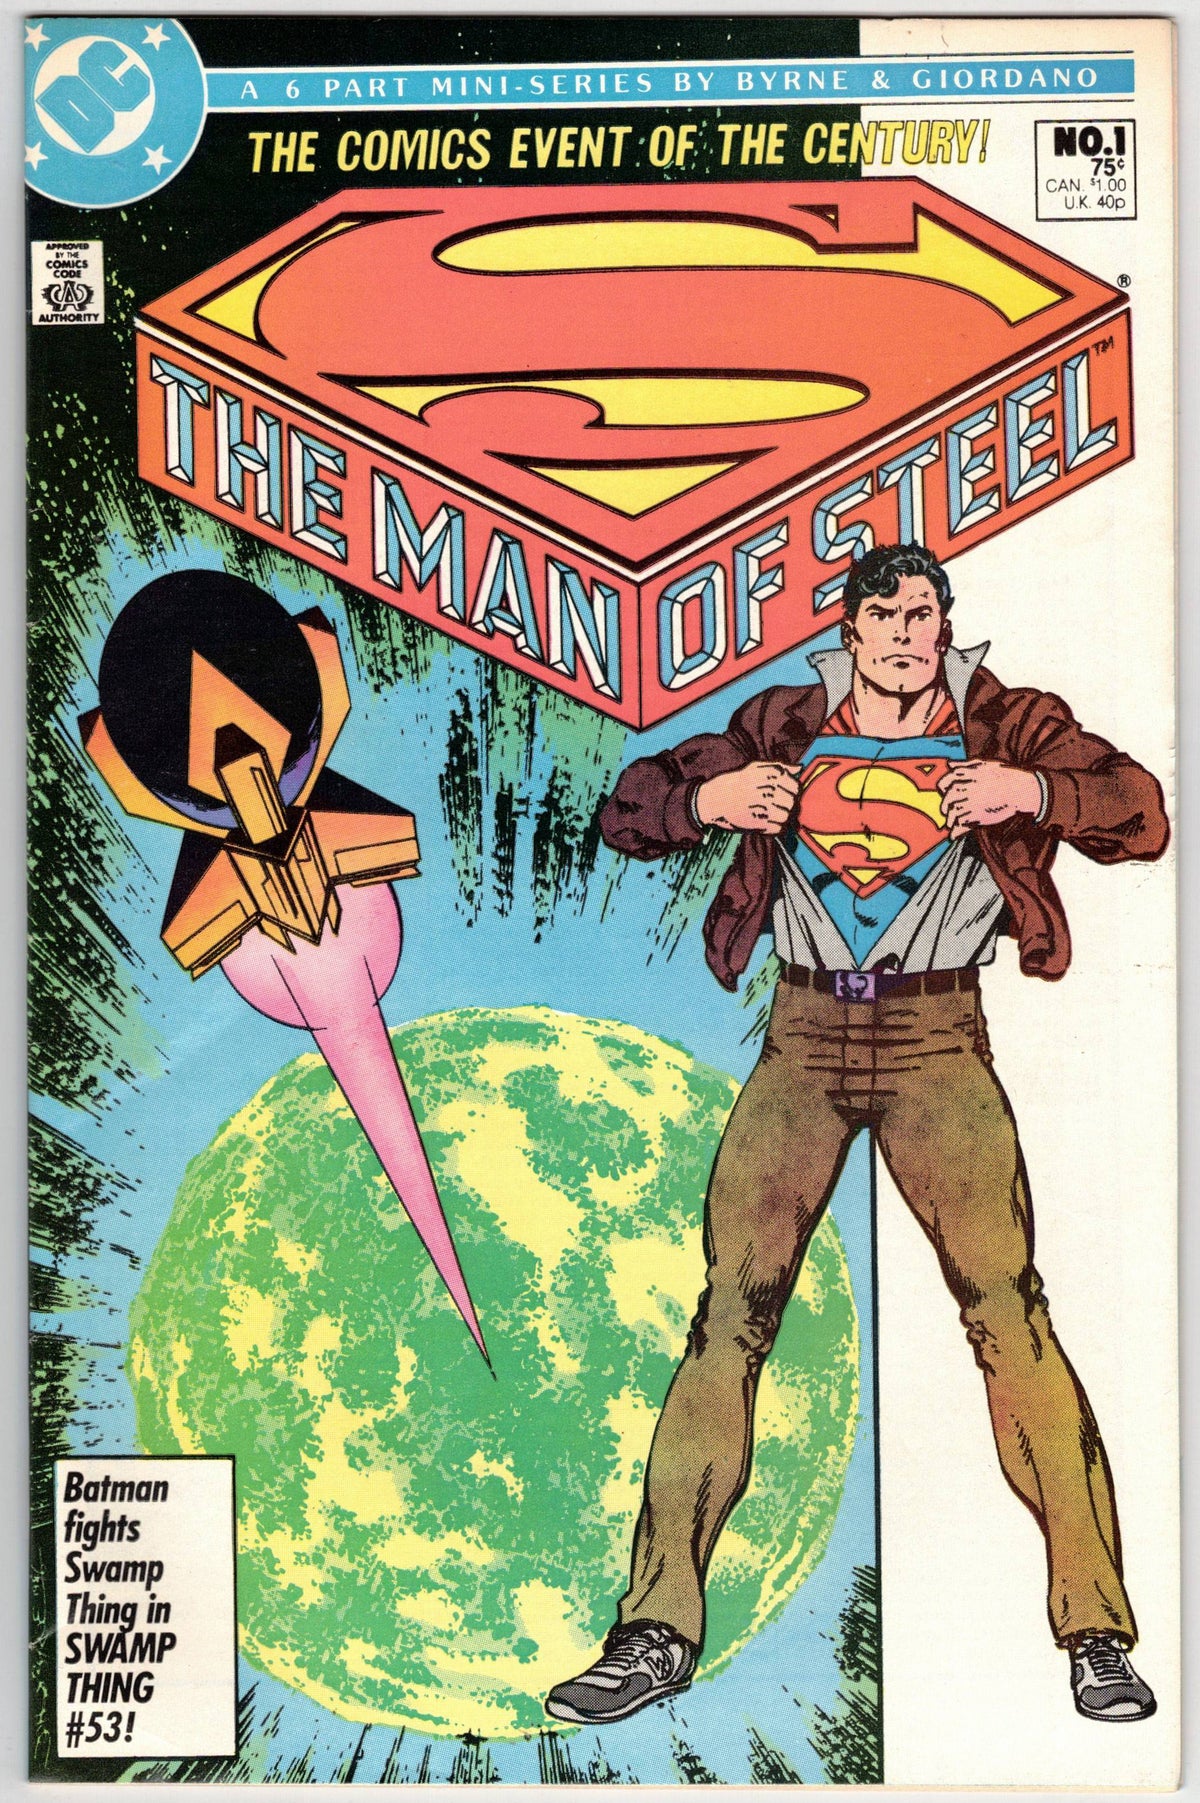 Photo of Man of Steel, Vol. 1 (1986) Issue 1A - Very Fine/Near Mint Comic sold by Stronghold Collectibles